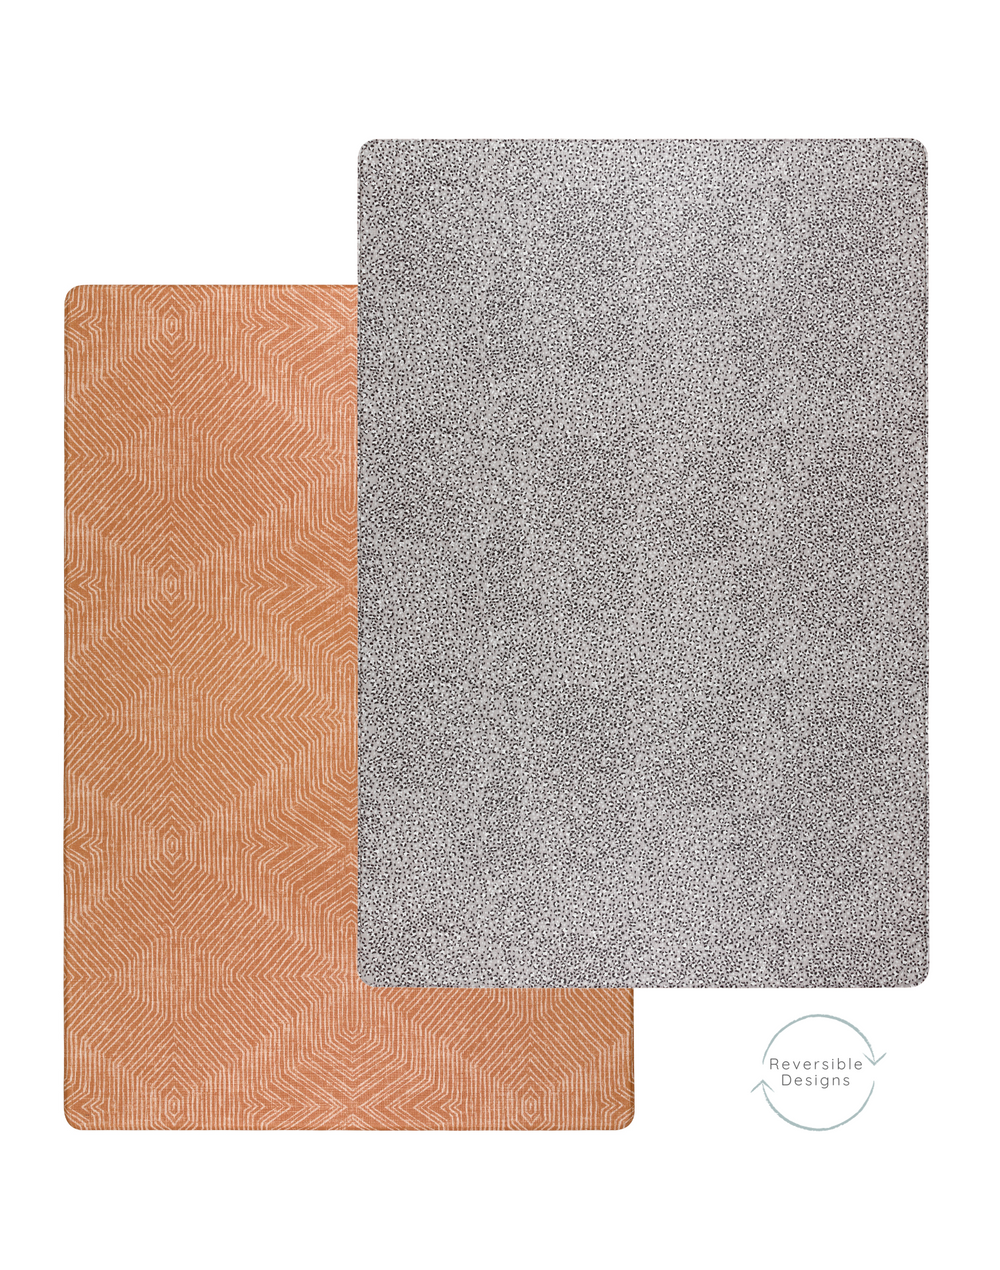 Double sided reversible waterproof play mat with two modern colourways that complement modern interiors